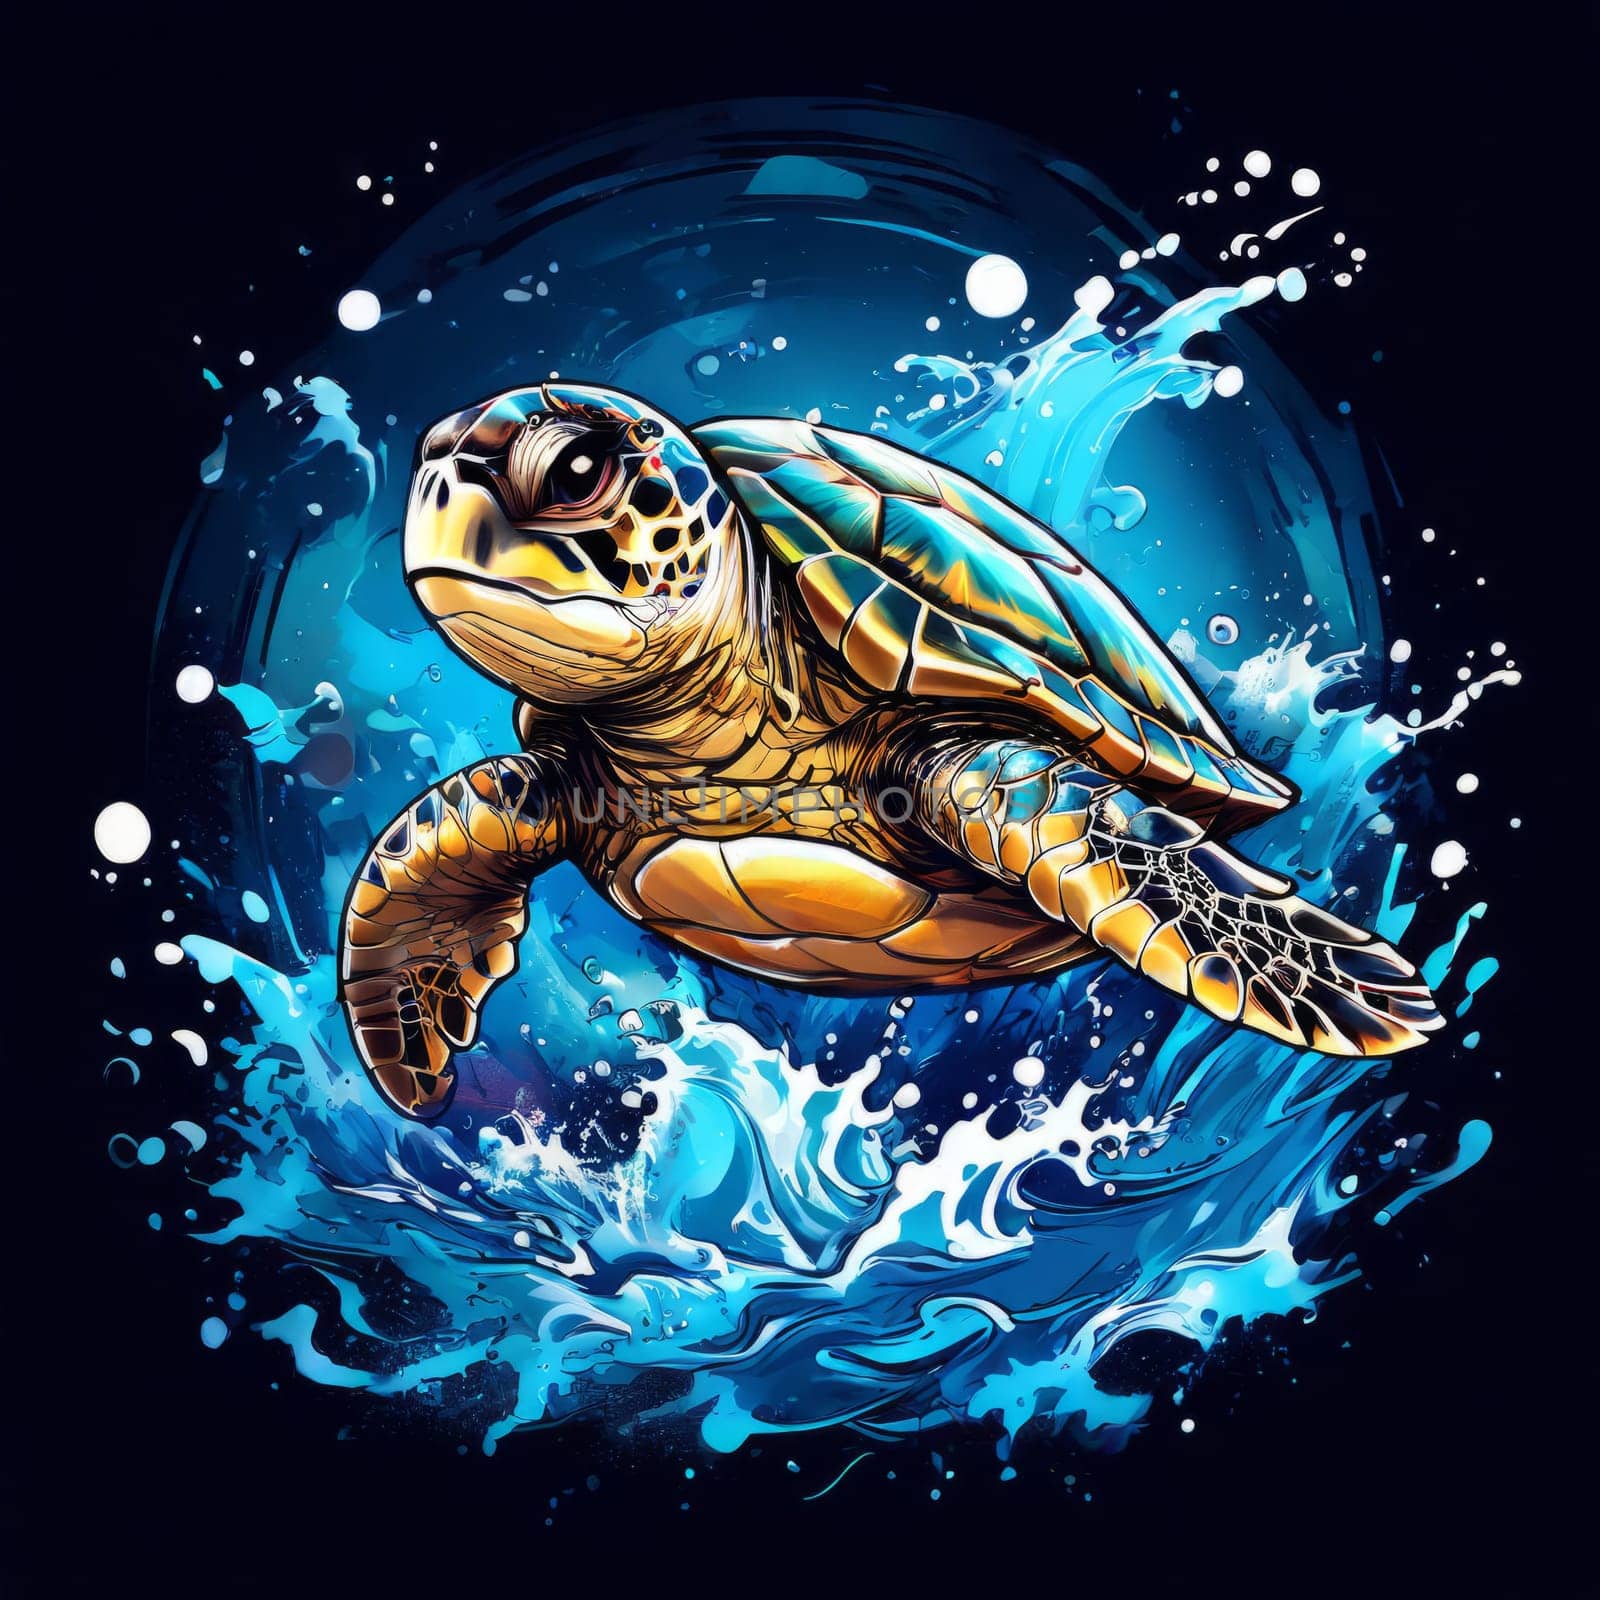 Turtle gracefully swimming in water. For educational materials for kids, game design, animated movies, tourism, stationery, Tshirt design, posters, postcards, childrens books